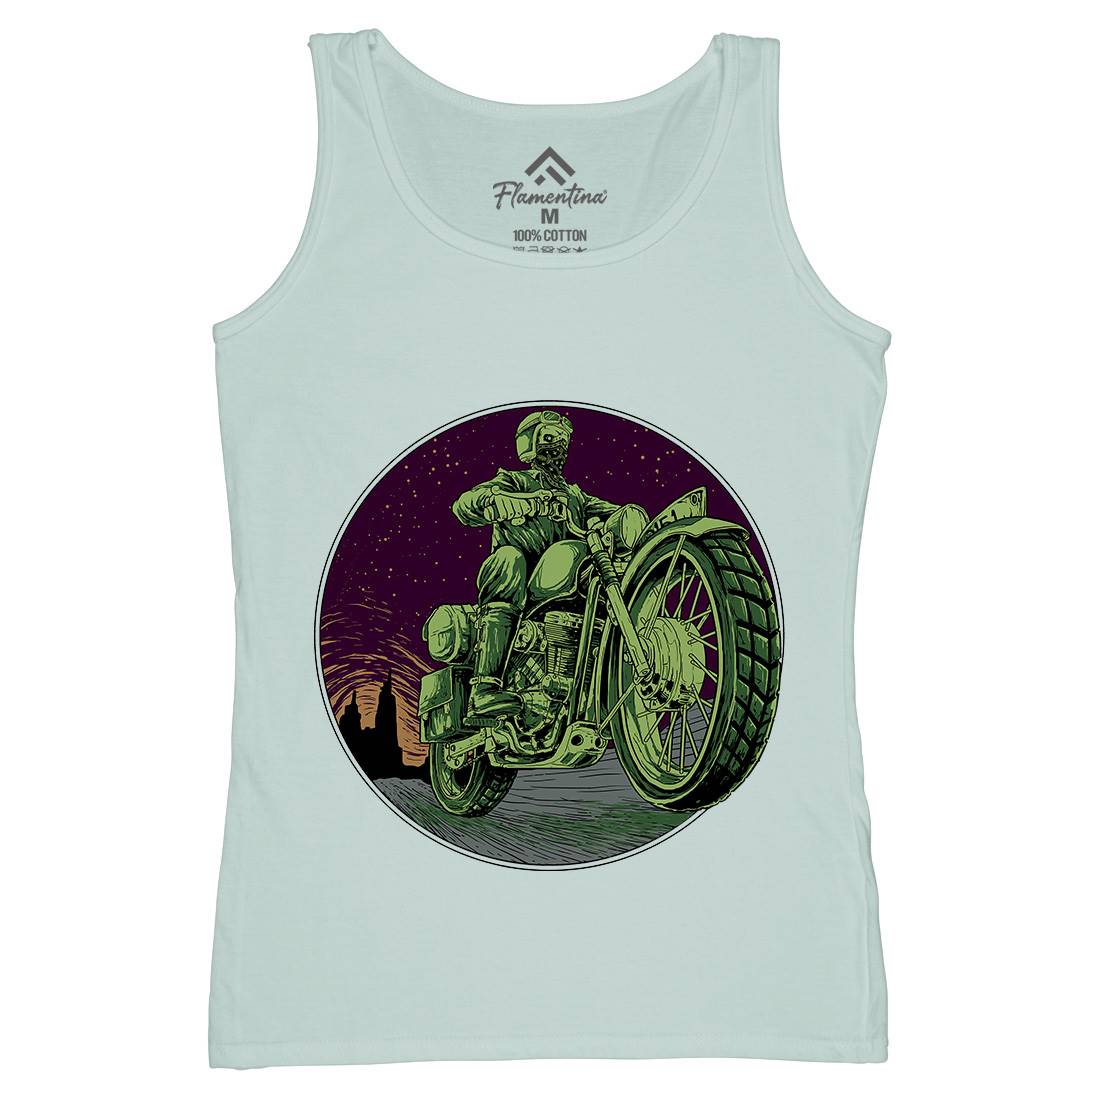 Cafe Racer Womens Organic Tank Top Vest Motorcycles D016